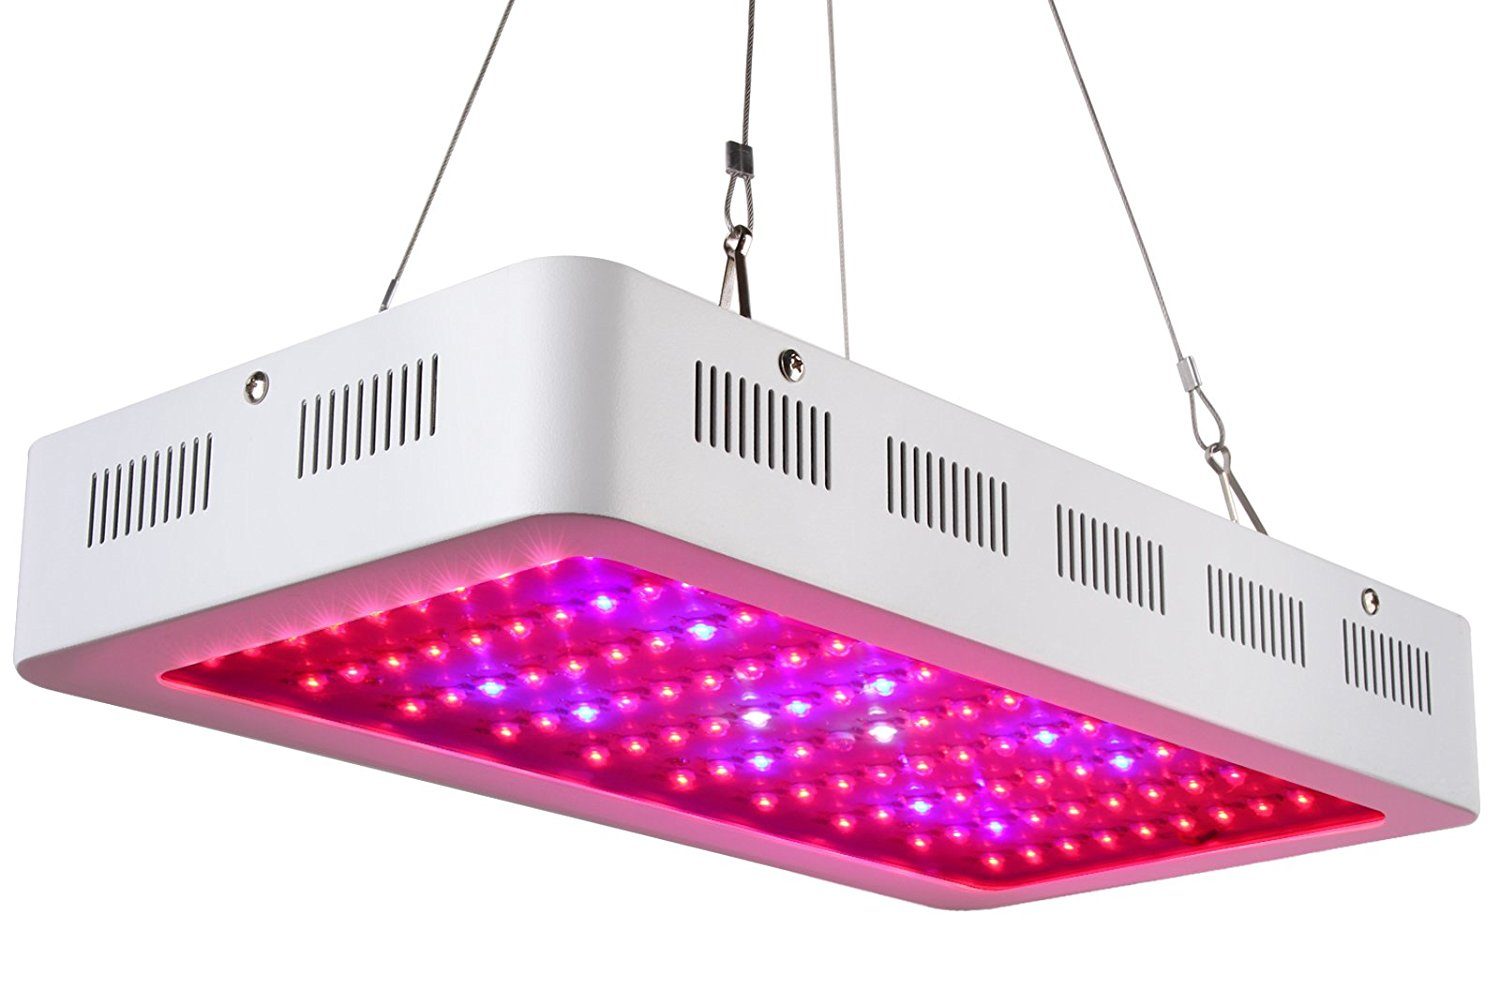 300w led grow light review